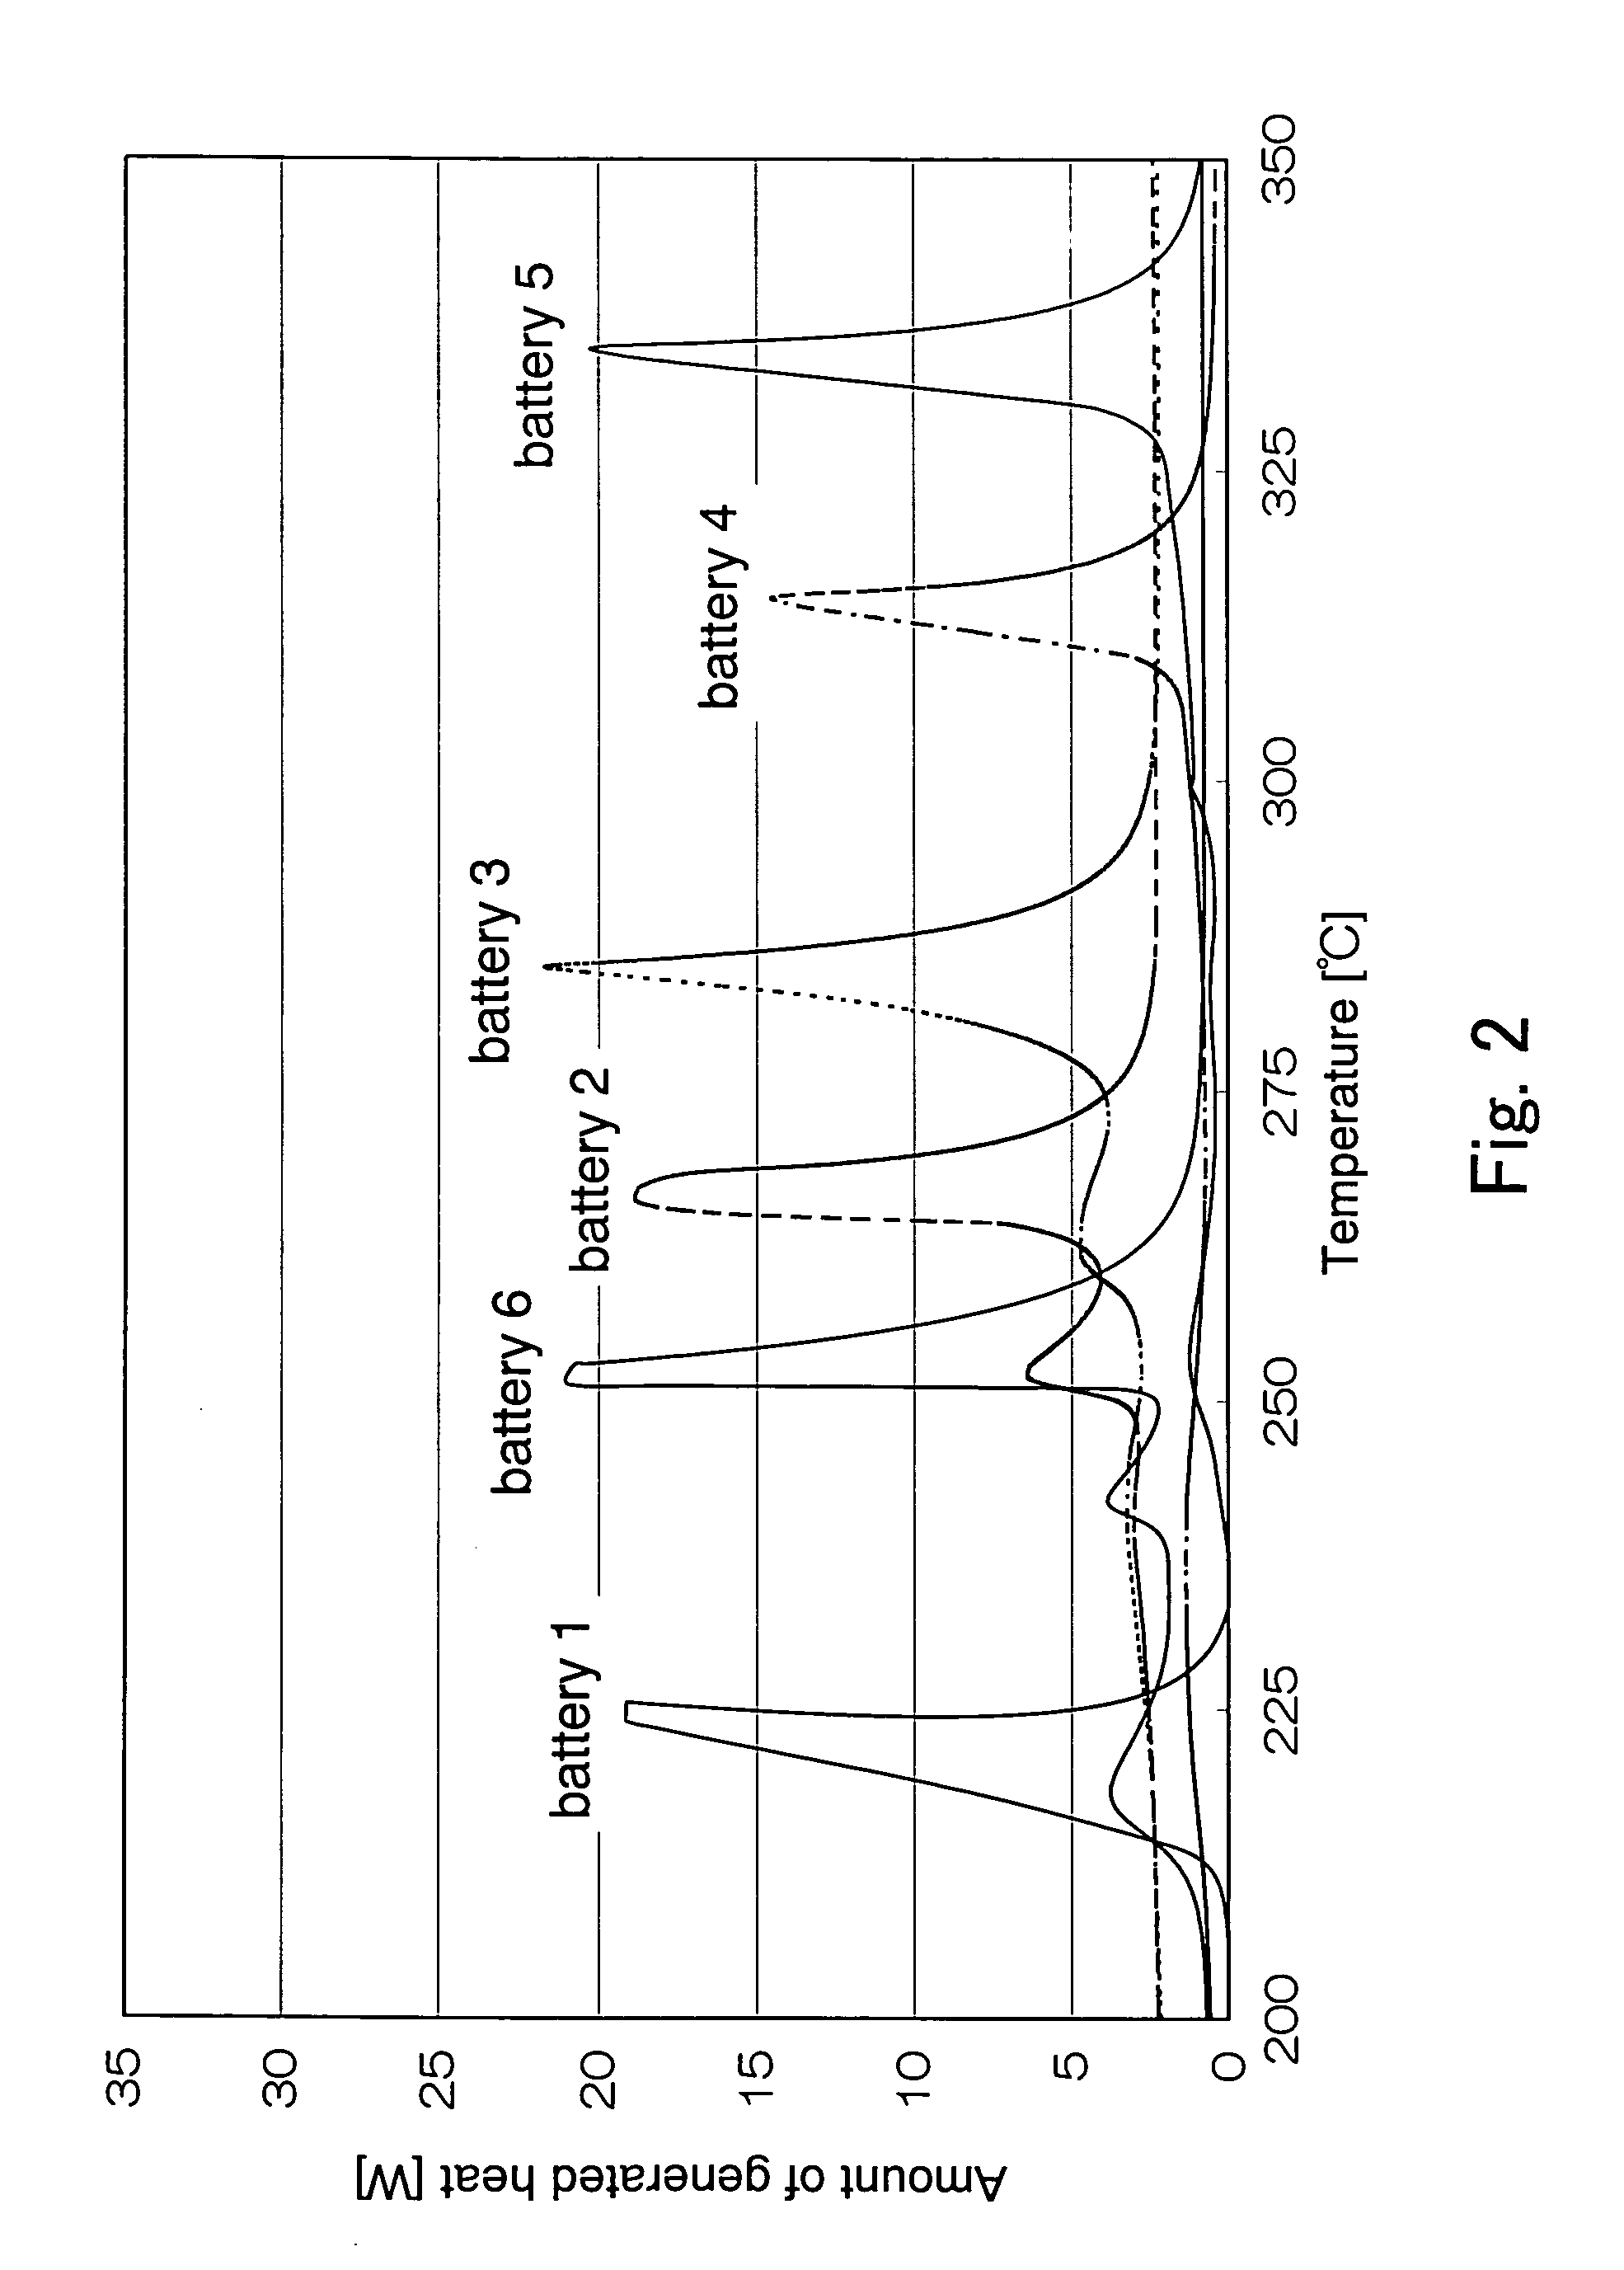 Non-aqueous electrolyte secondary battery and method for producing active material substance used for anode thereof